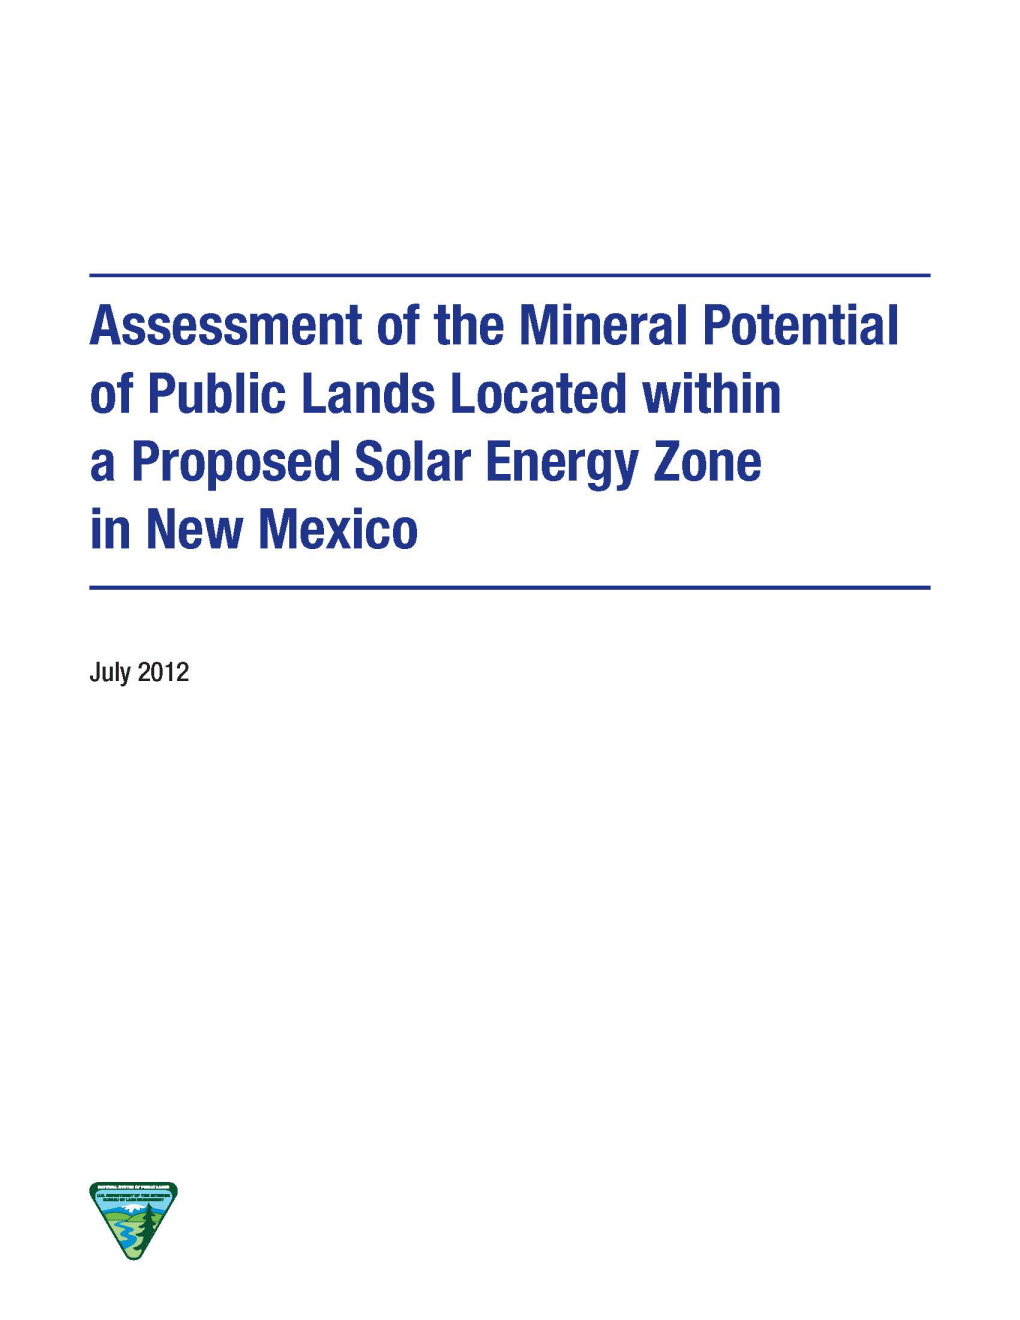 Assessment of the Mineral Potential of Public Lands Located Within a Proposed Solar Energy Zone in New Mexico